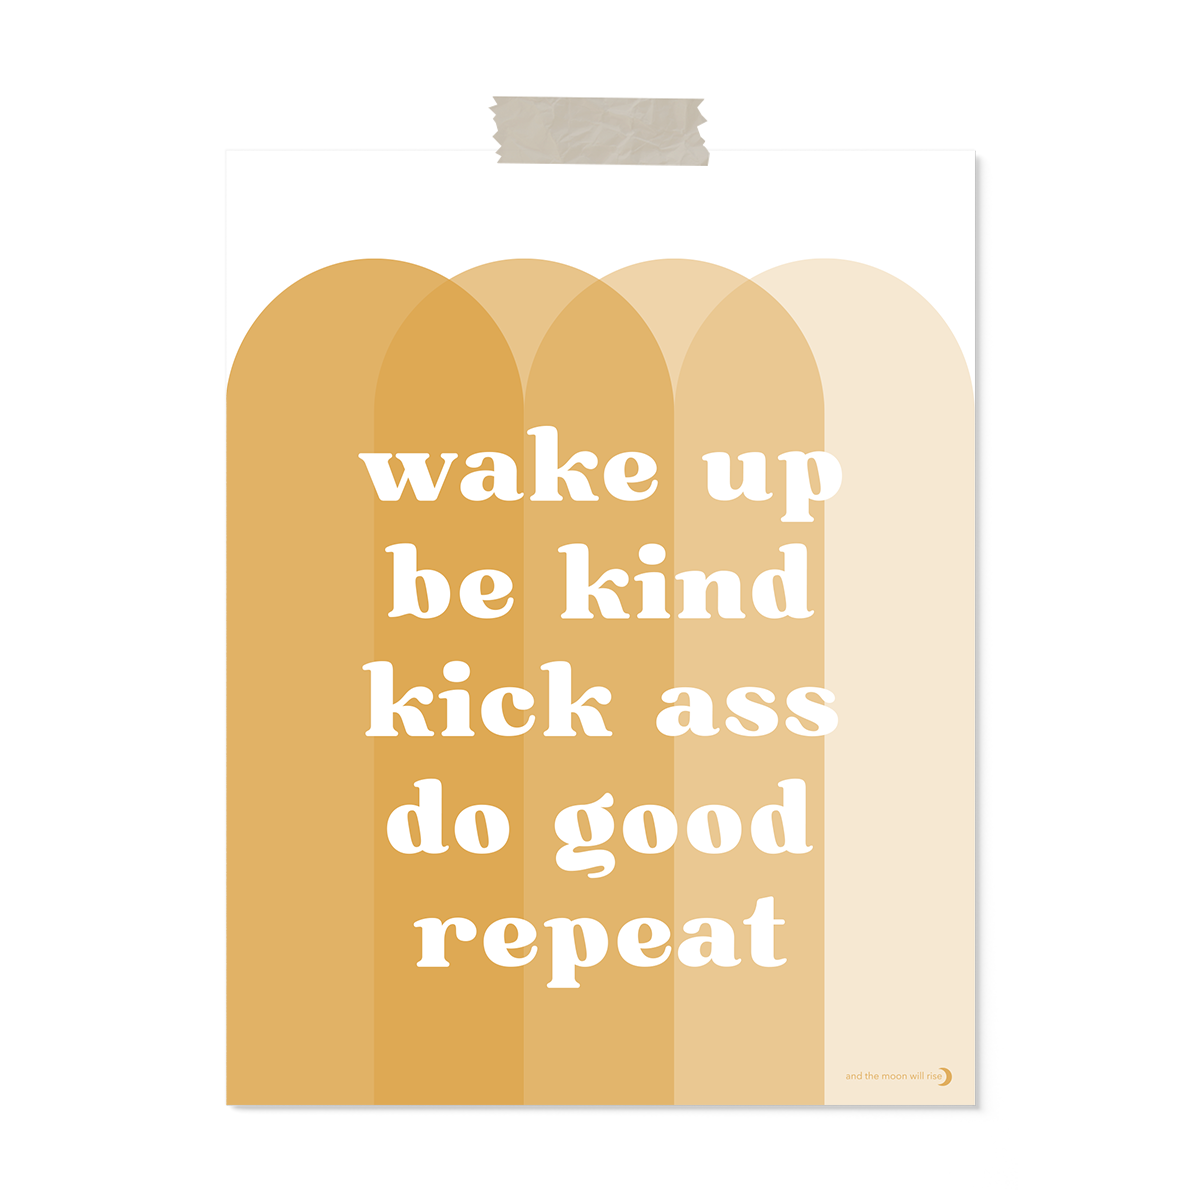 11x14 unframed art print; front reads "wake up ~ be kind ~ kick ass ~ do good ~ repeat" in white font atop overlapping arches in shades of gold on white background